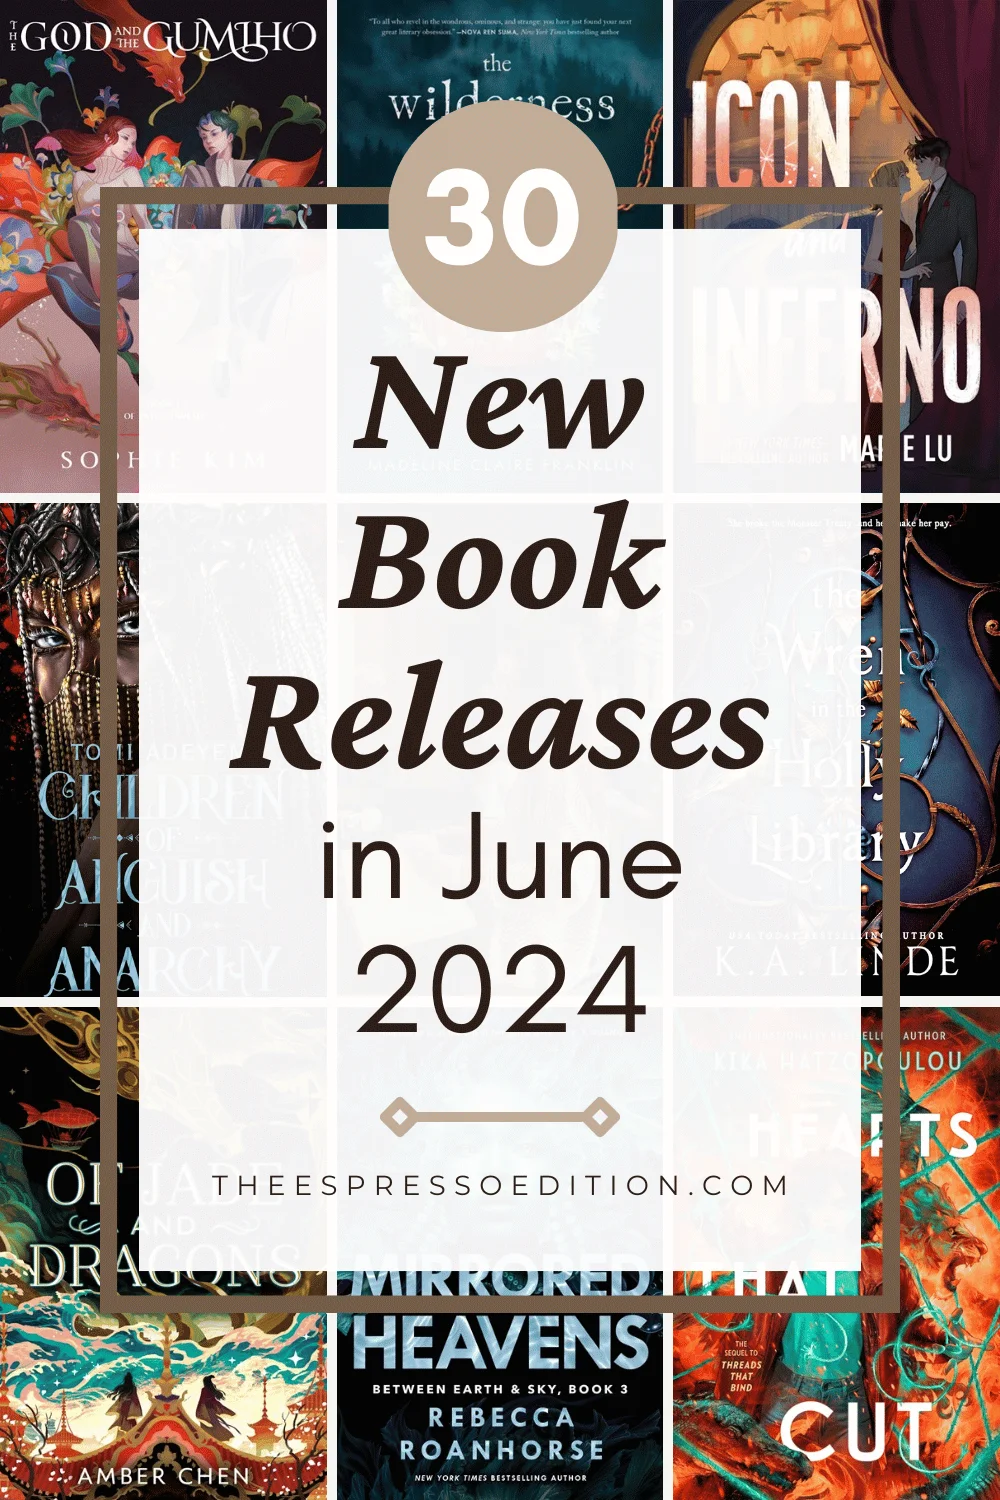 30 New Book Releases in June 2024 by The Espresso Edition cozy bookish blog